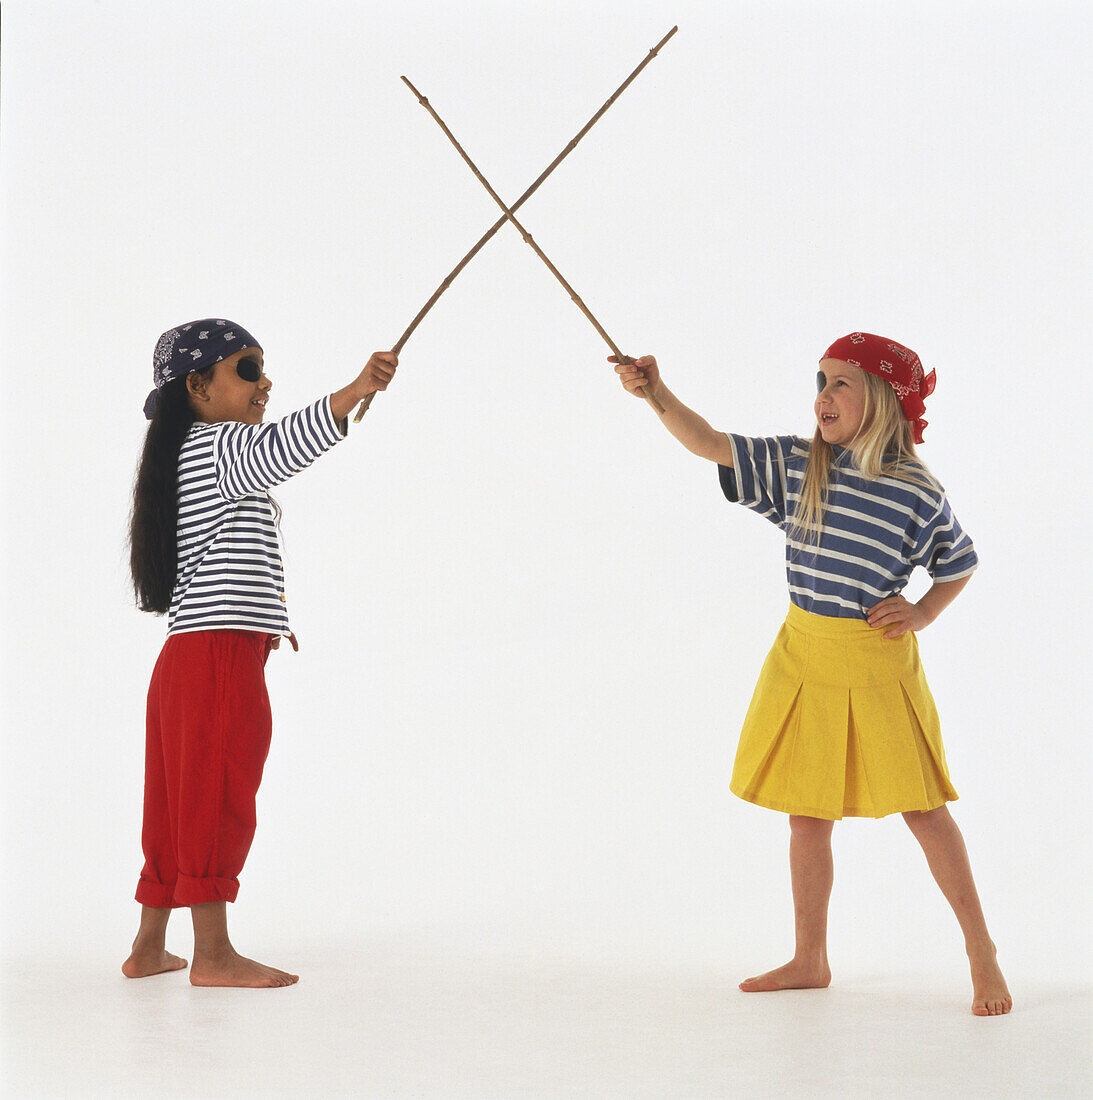 Girls in pirate costumes crossing twig 'swords'